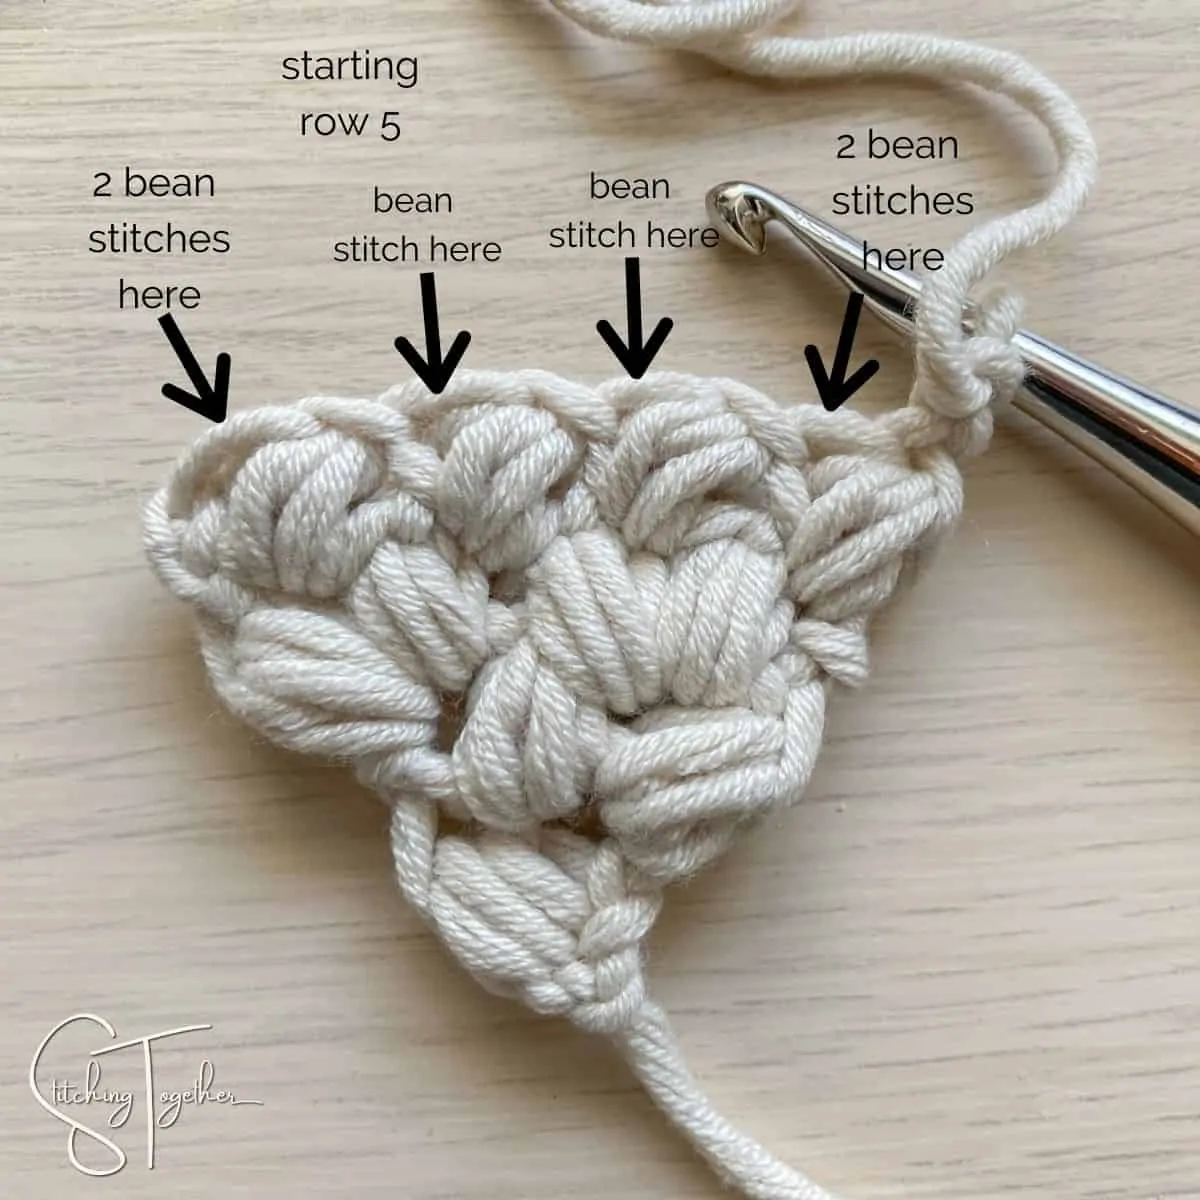 arrows showing where to place the stitches for row 5 on crochet fabric